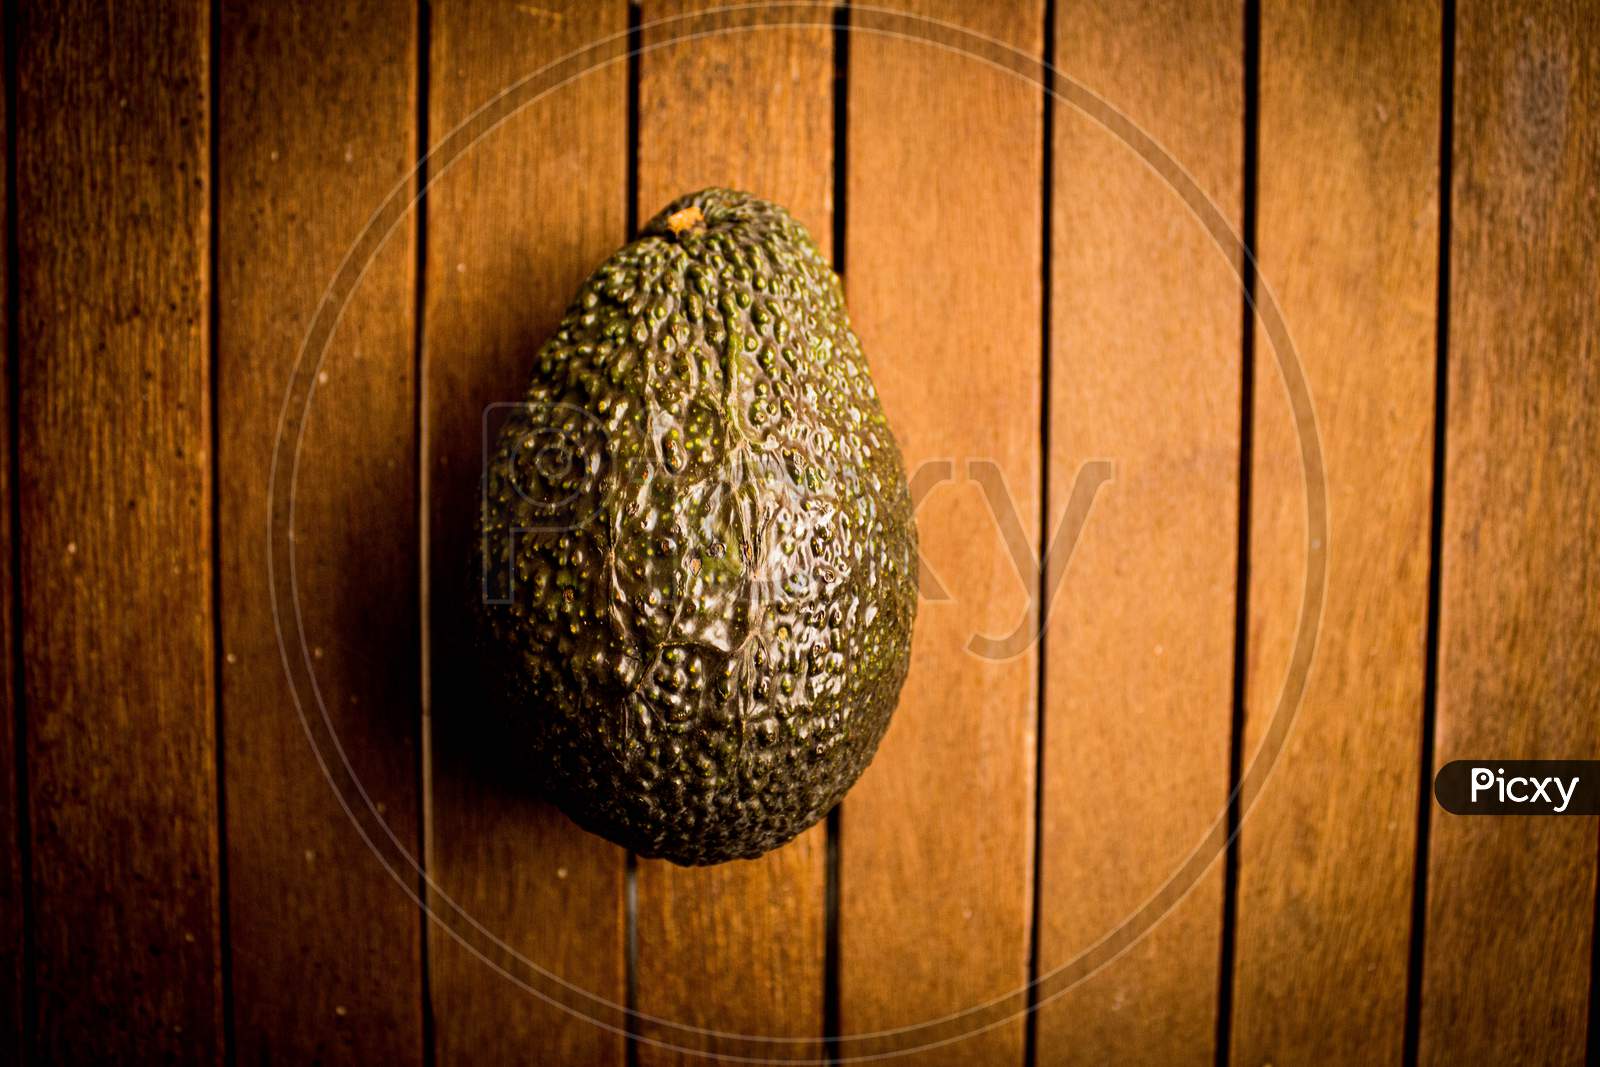 A Different Kind Of Avocado